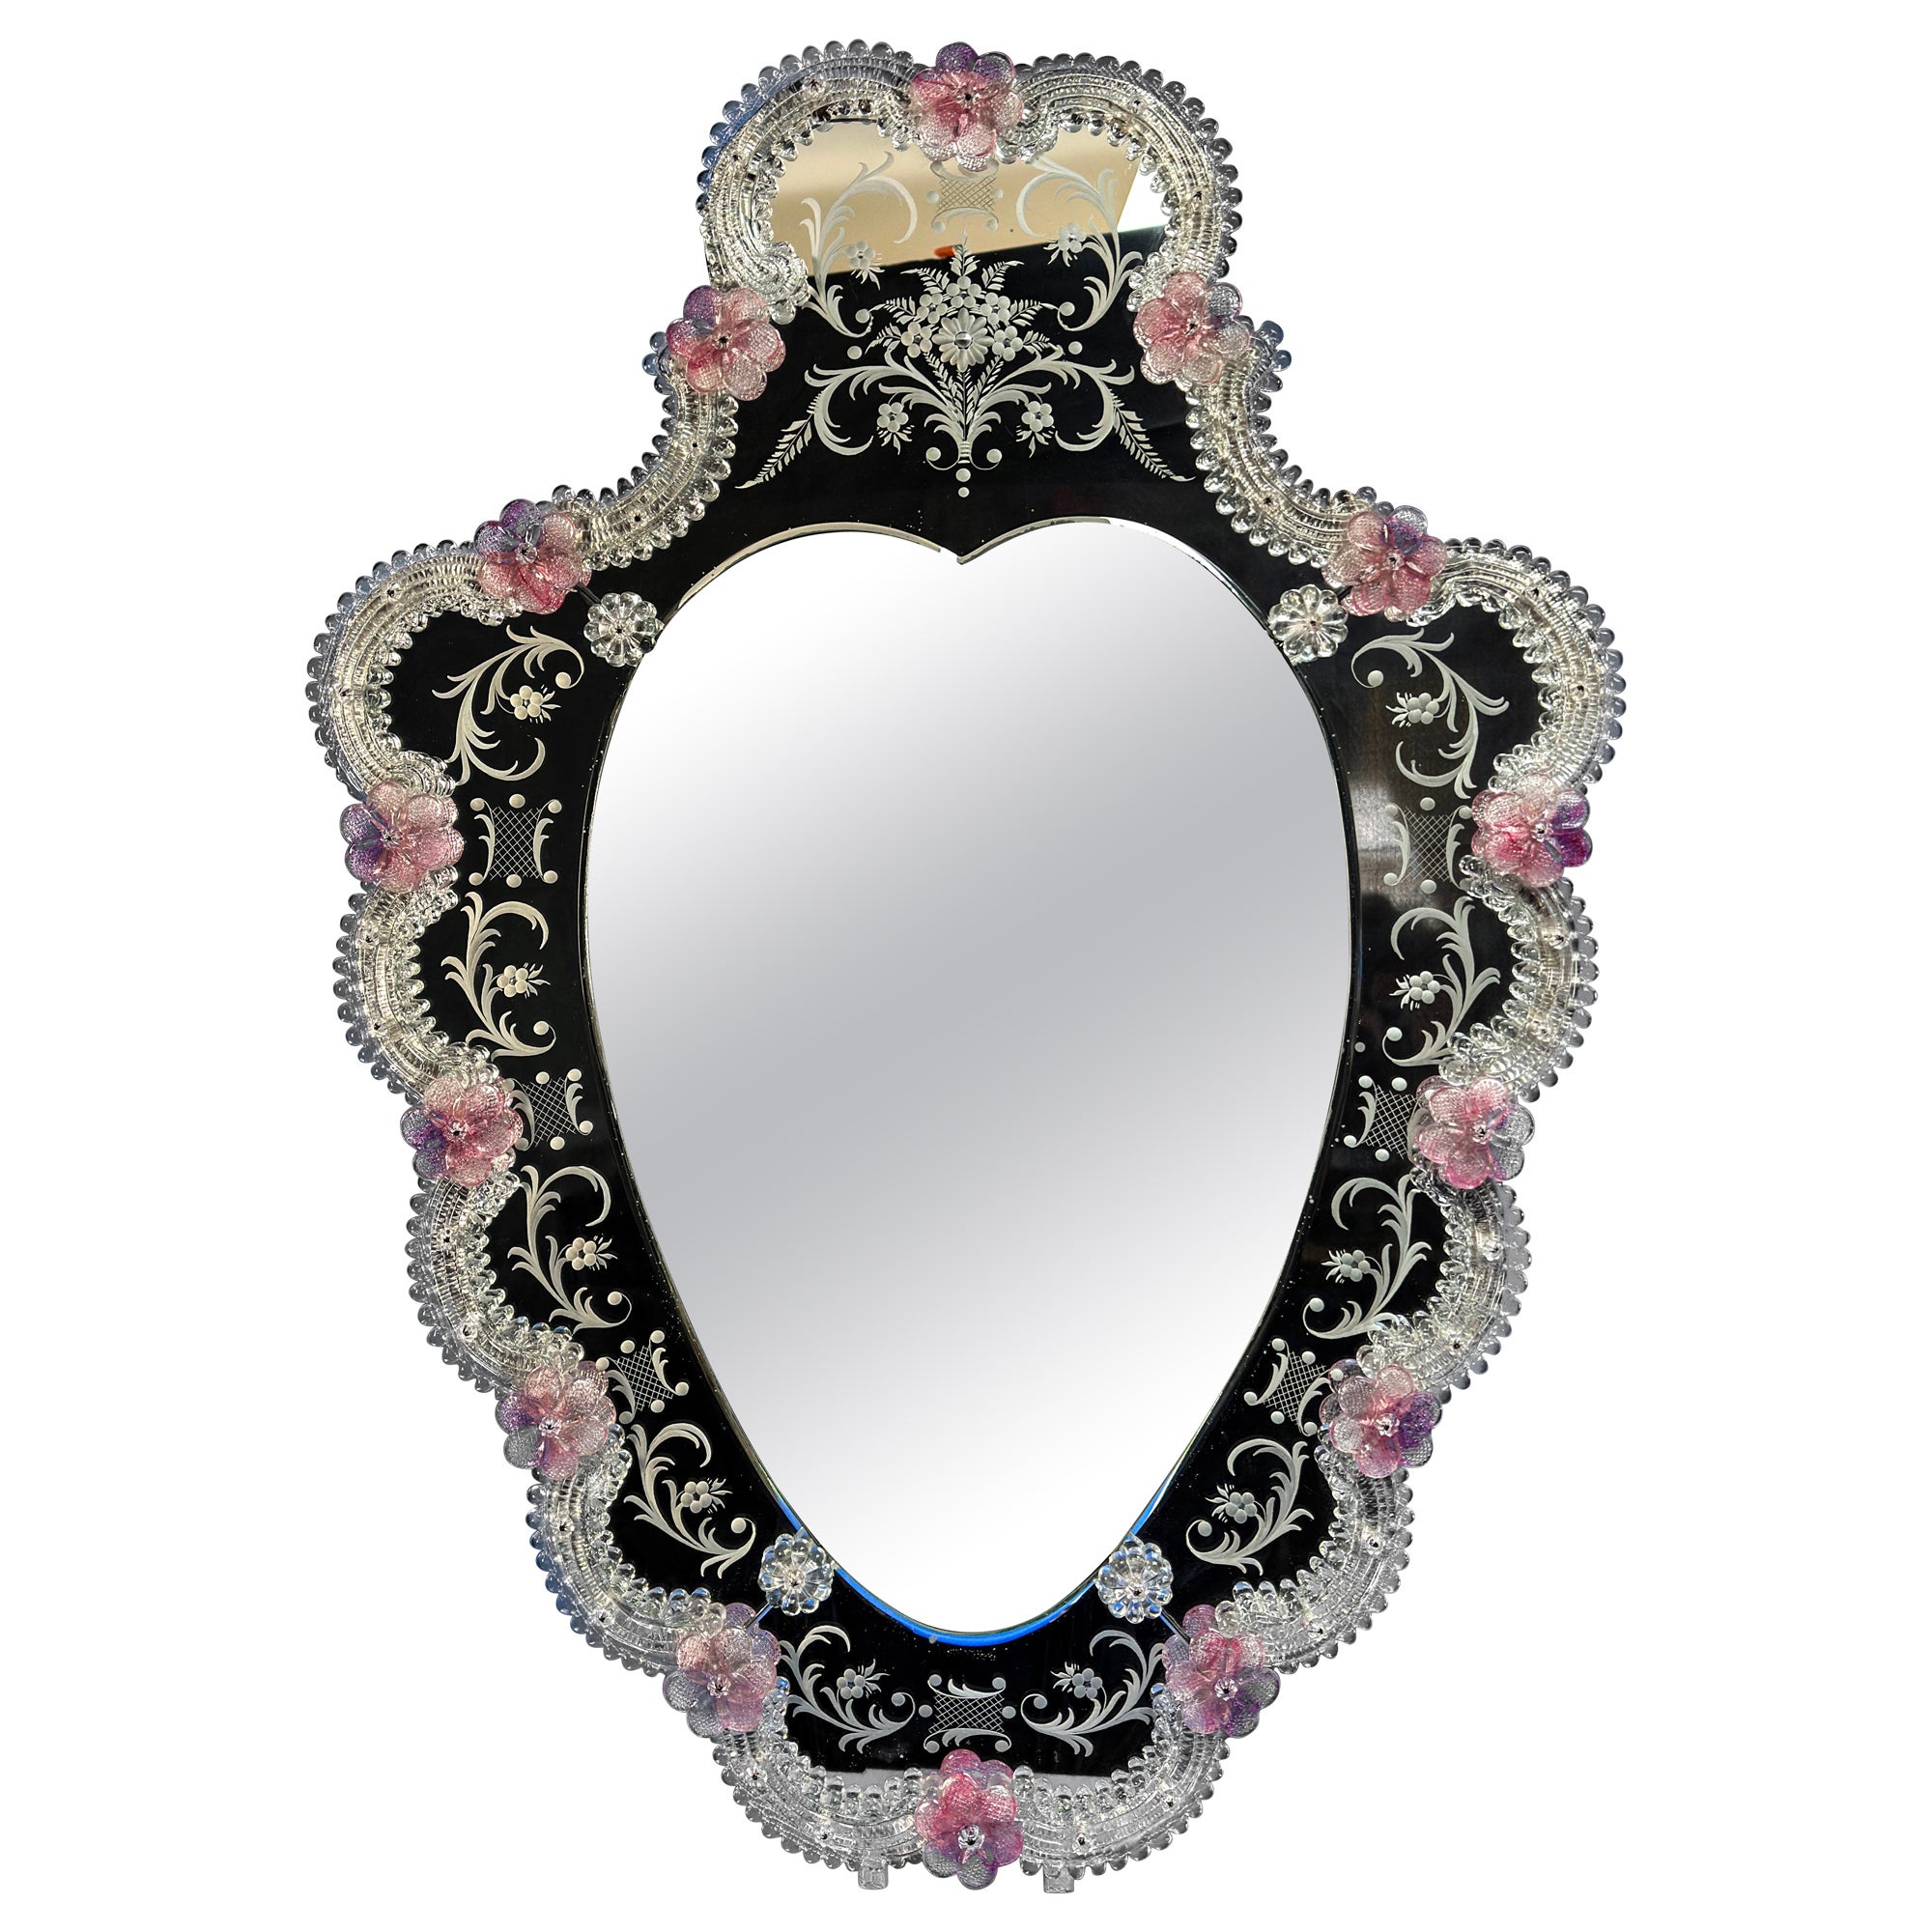 1960s Venetian Mirror, Heart Shaped Frame with Pink Murano Glass Flowers